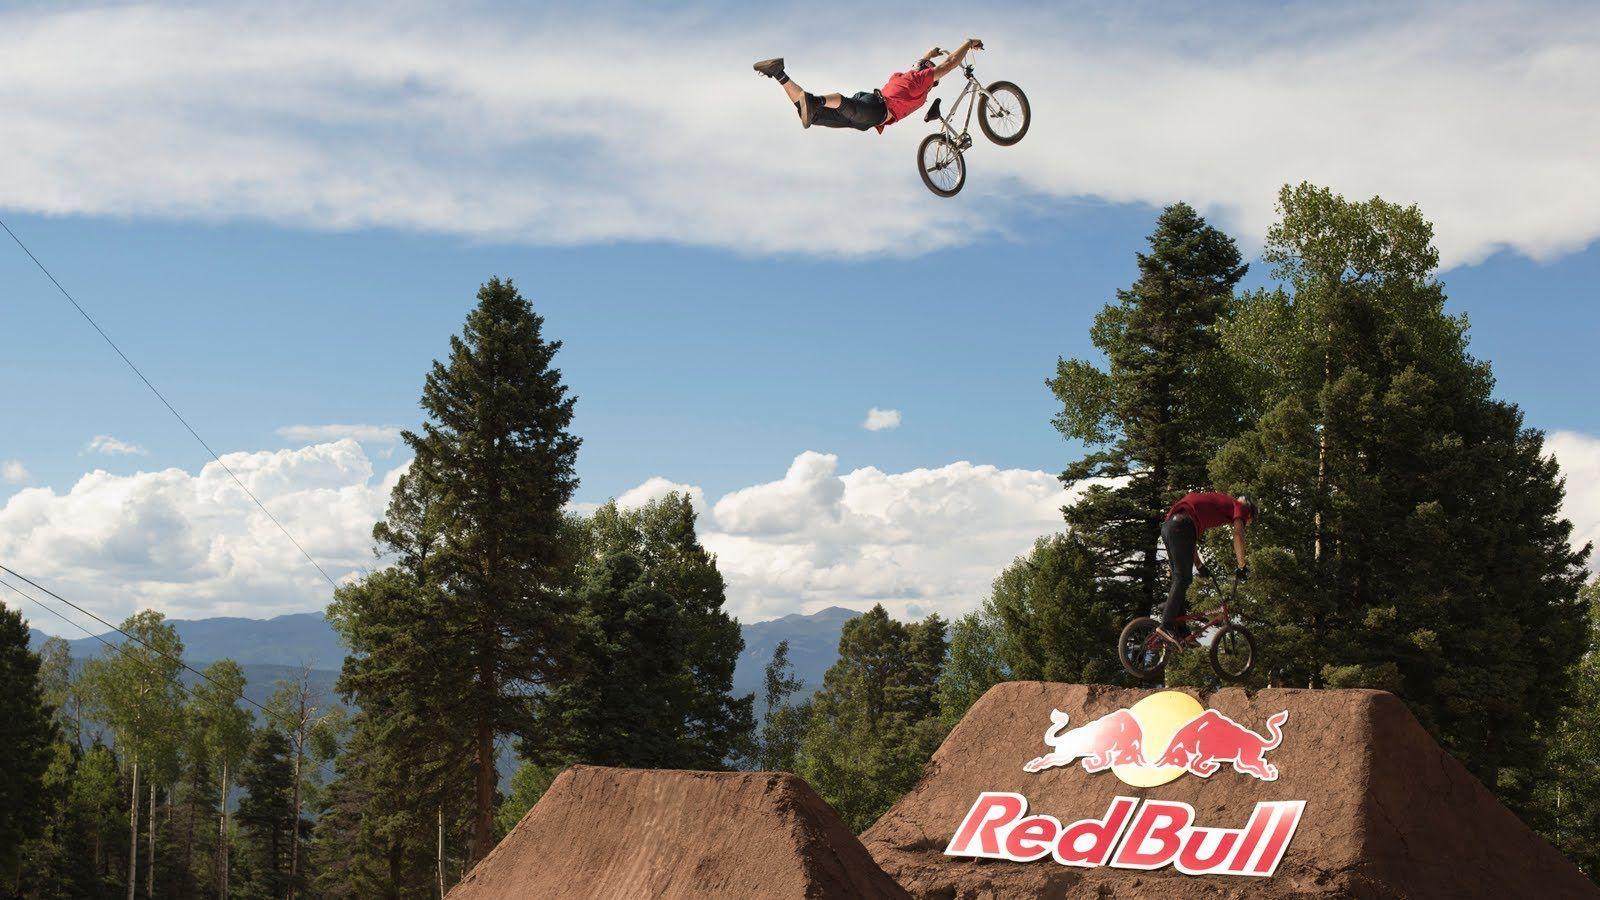 The Biggest Dirt Jump Contest of 2013 Bull Dreamline. Freefly